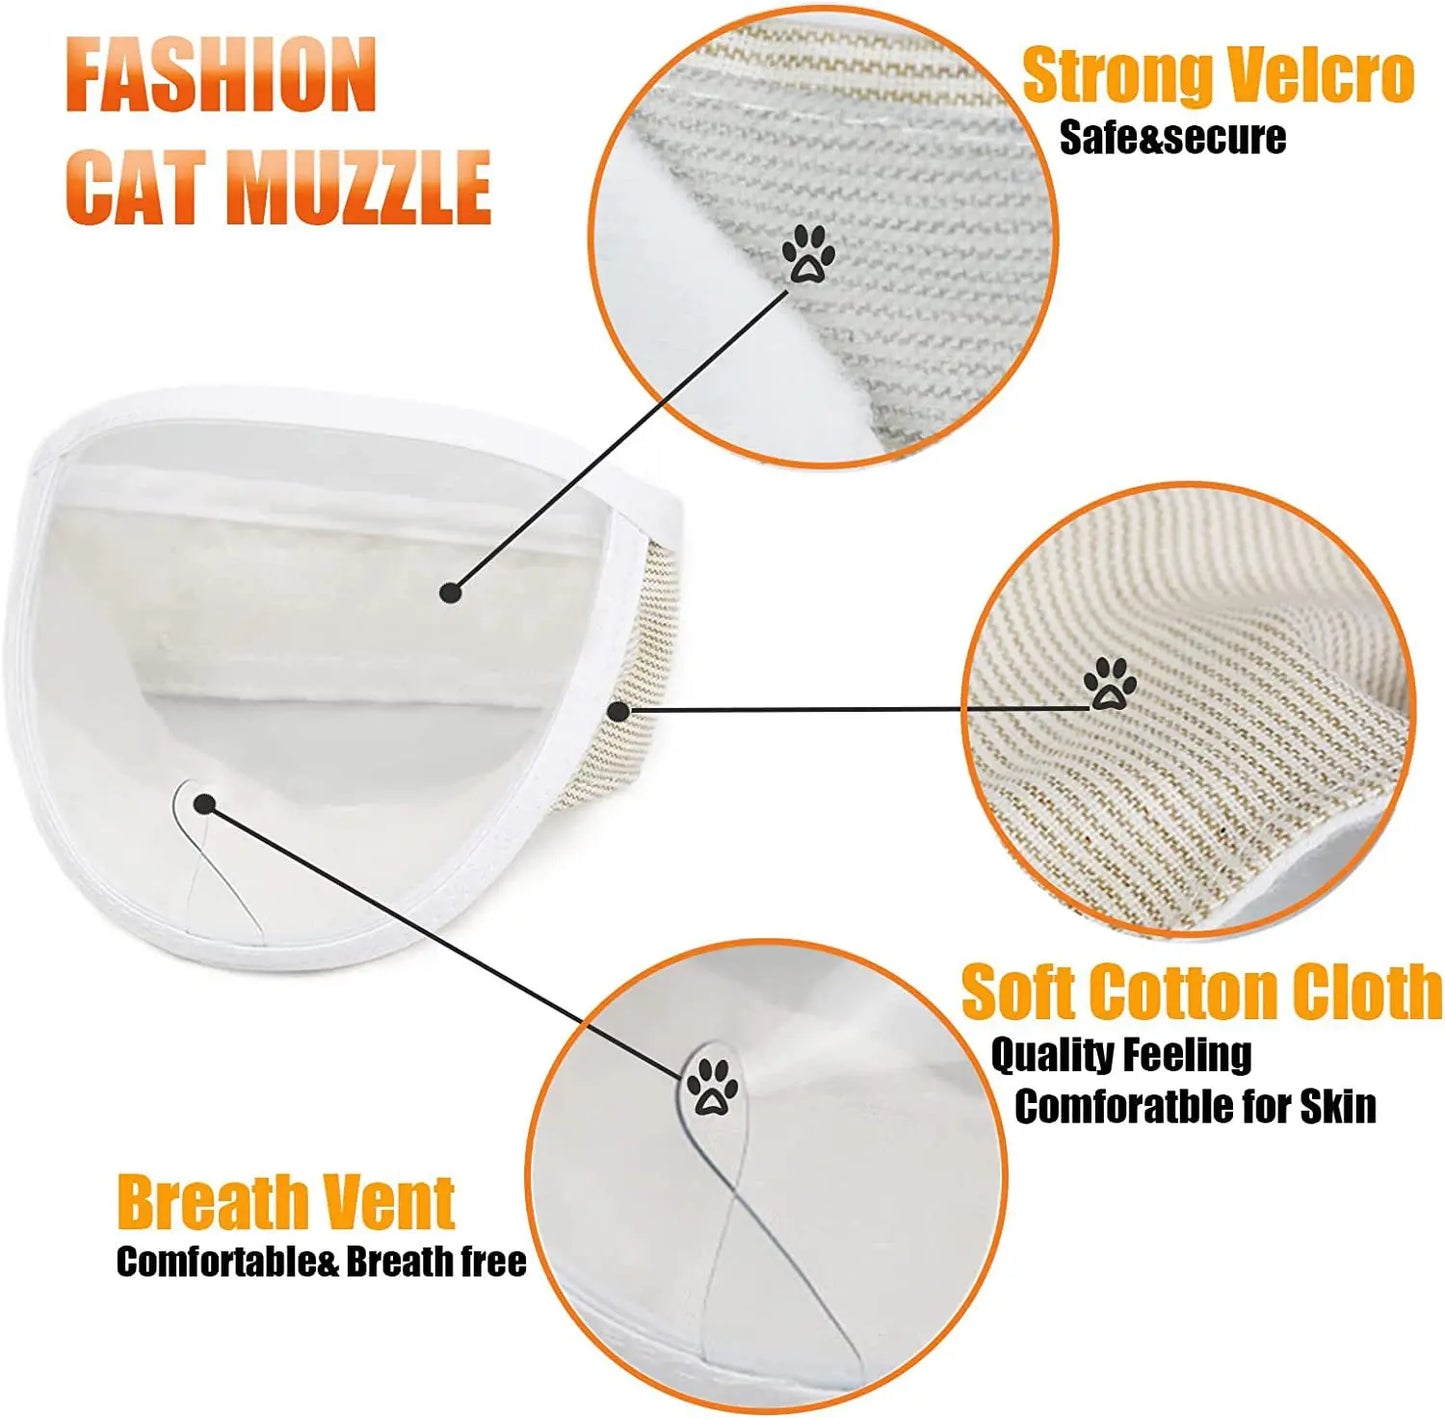 Cat Transparent Bathing + Nail Clipper Auxiliary Grooming Tools